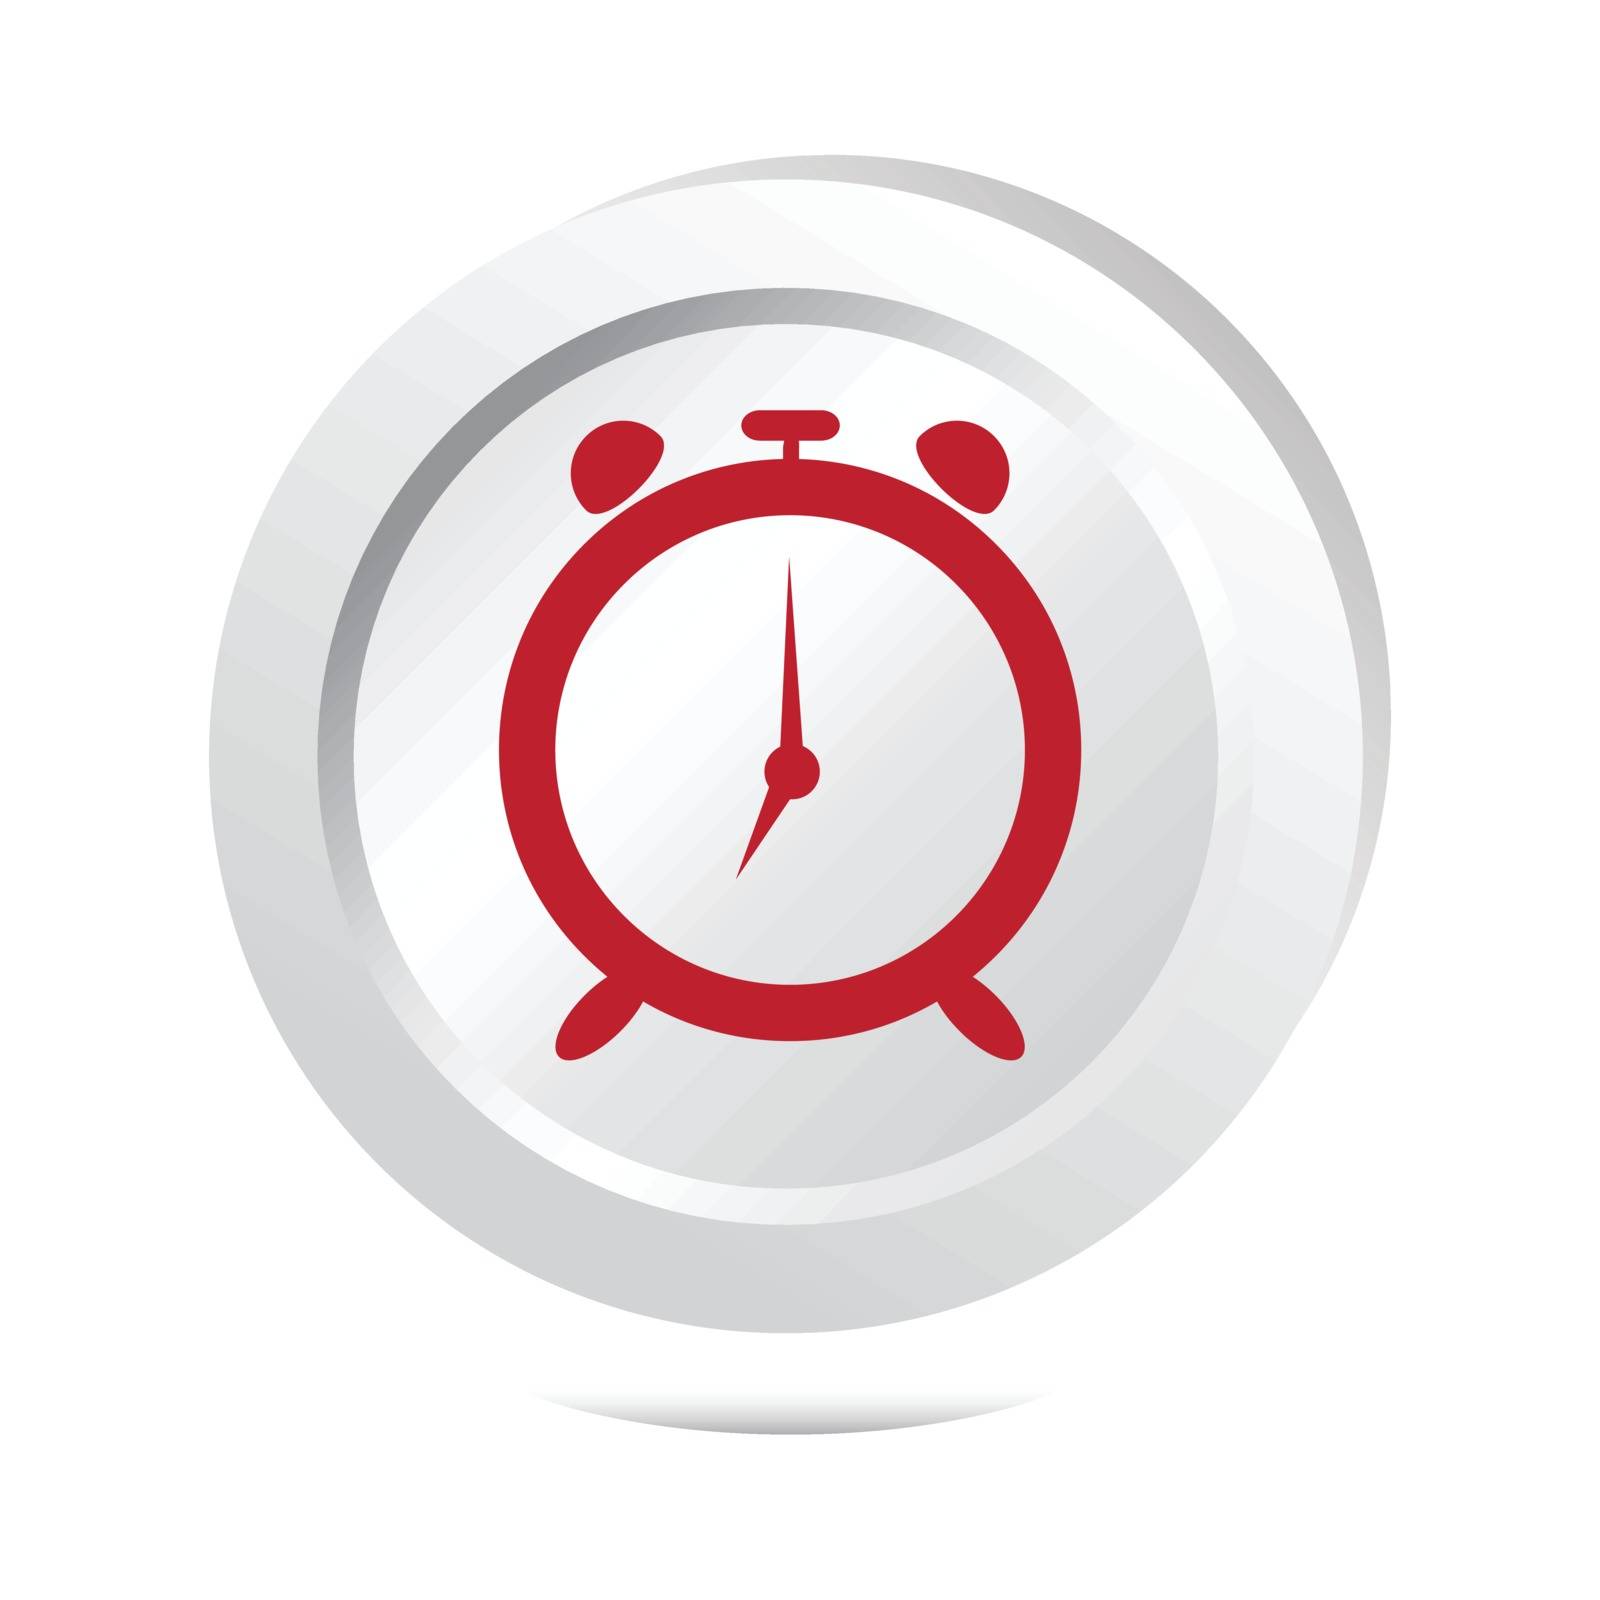 Alarm clock, wake up sign button icon by Kheat